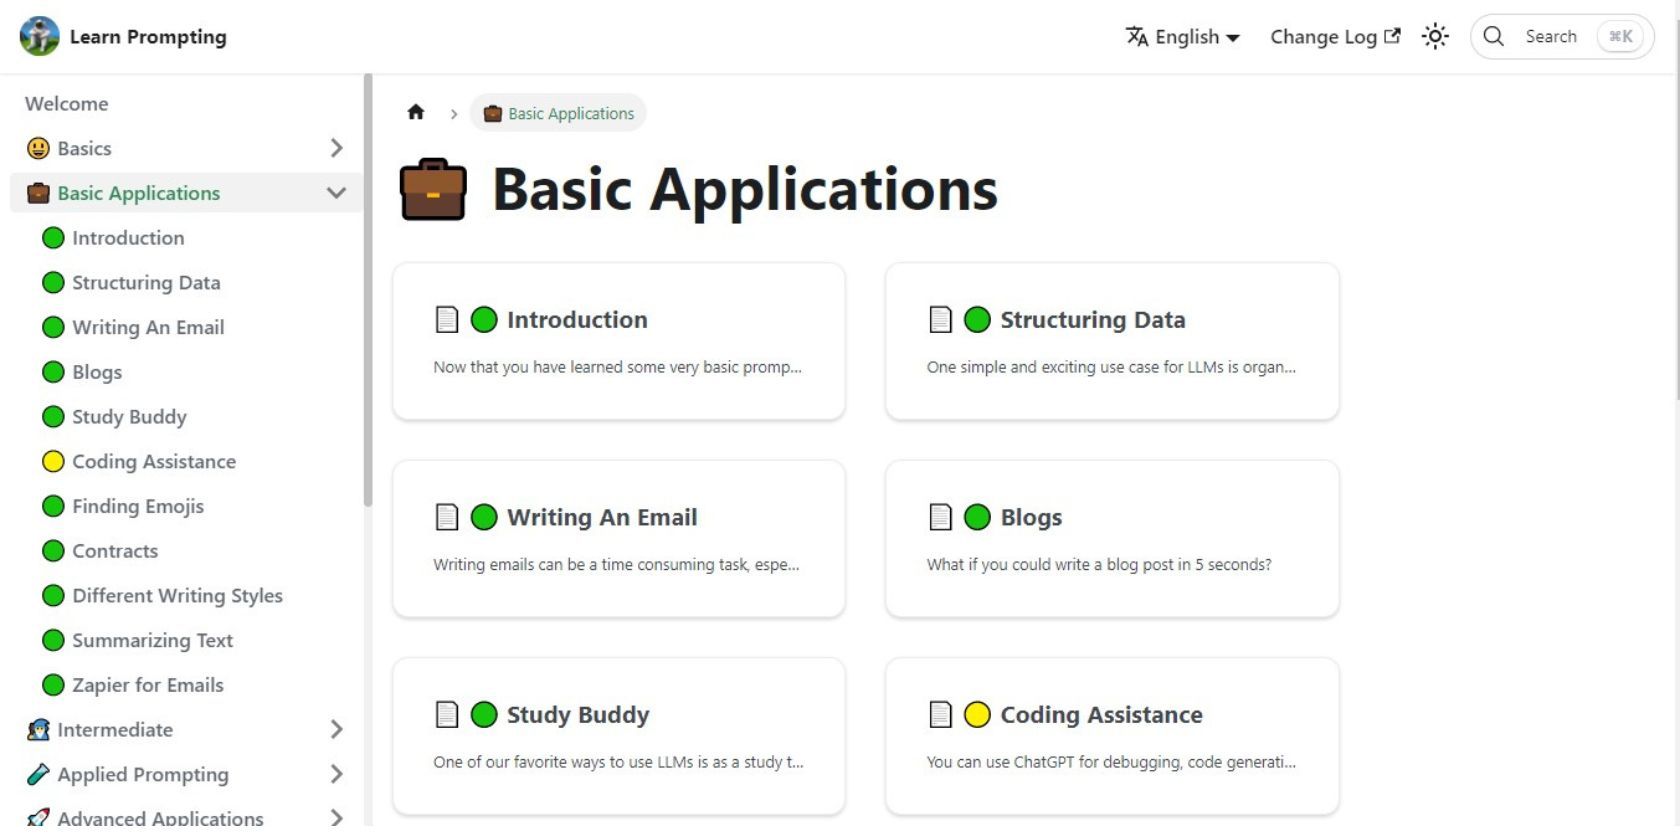 Learn Prompting Website showing Basic Applications lessons